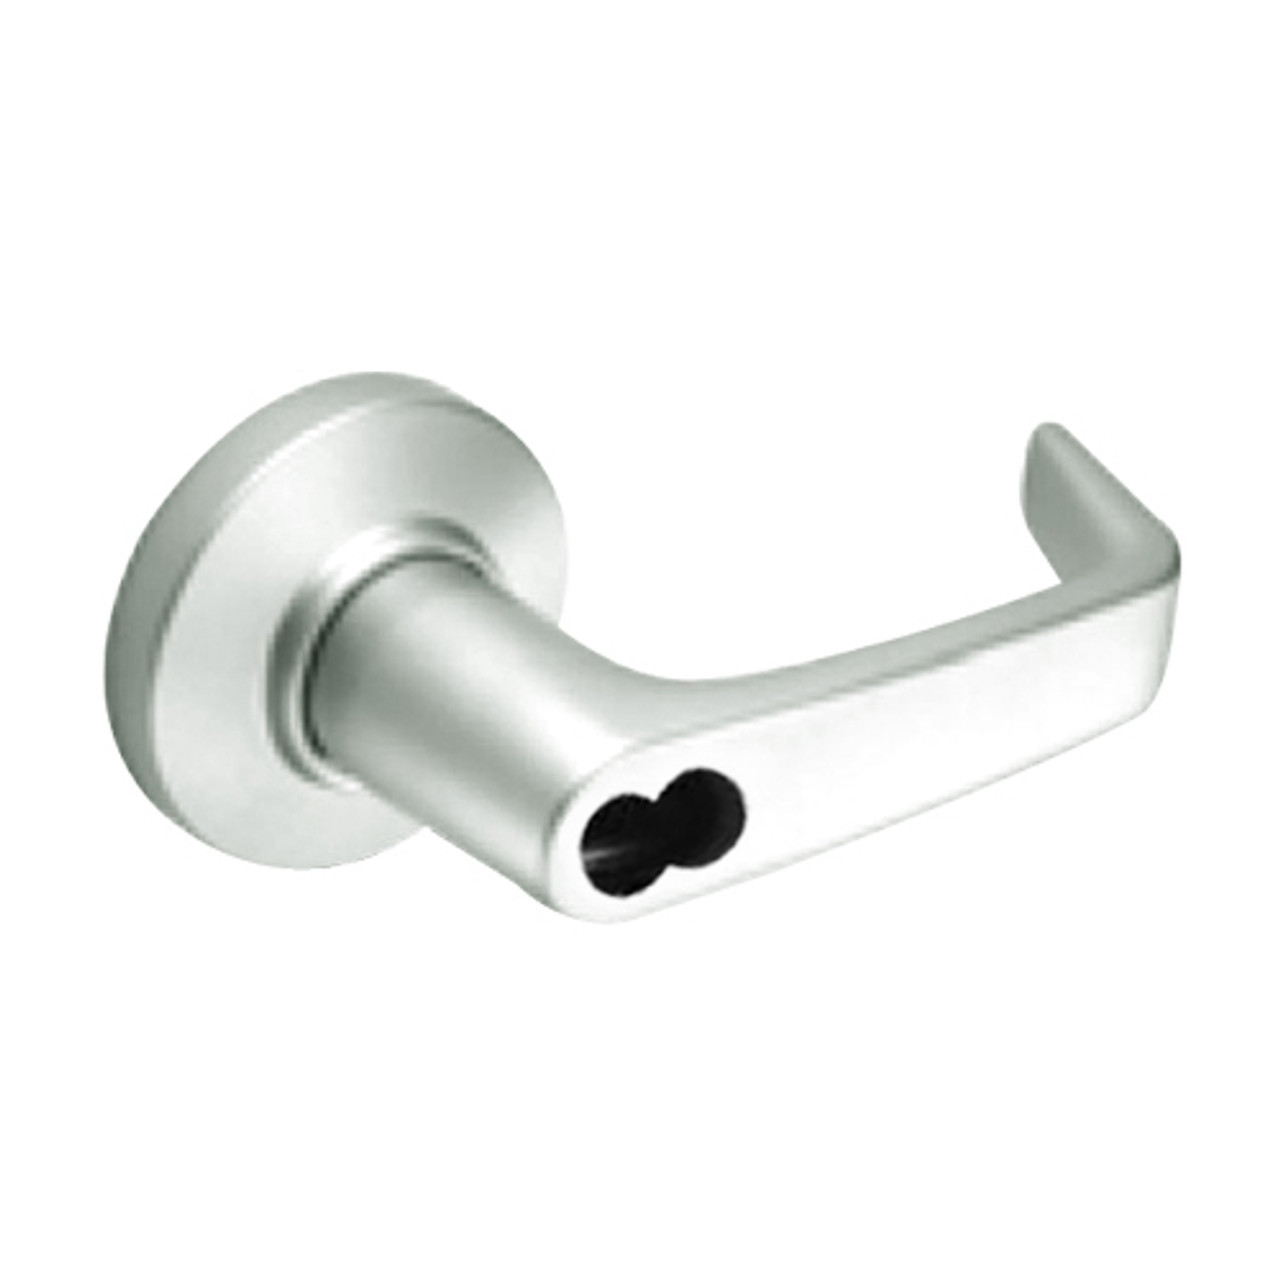 9K37A15CS3618LM Best 9K Series Dormitory or Storeroom Cylindrical Lever Locks with Contour Angle with Return Lever Design Accept 7 Pin Best Core in Bright Nickel